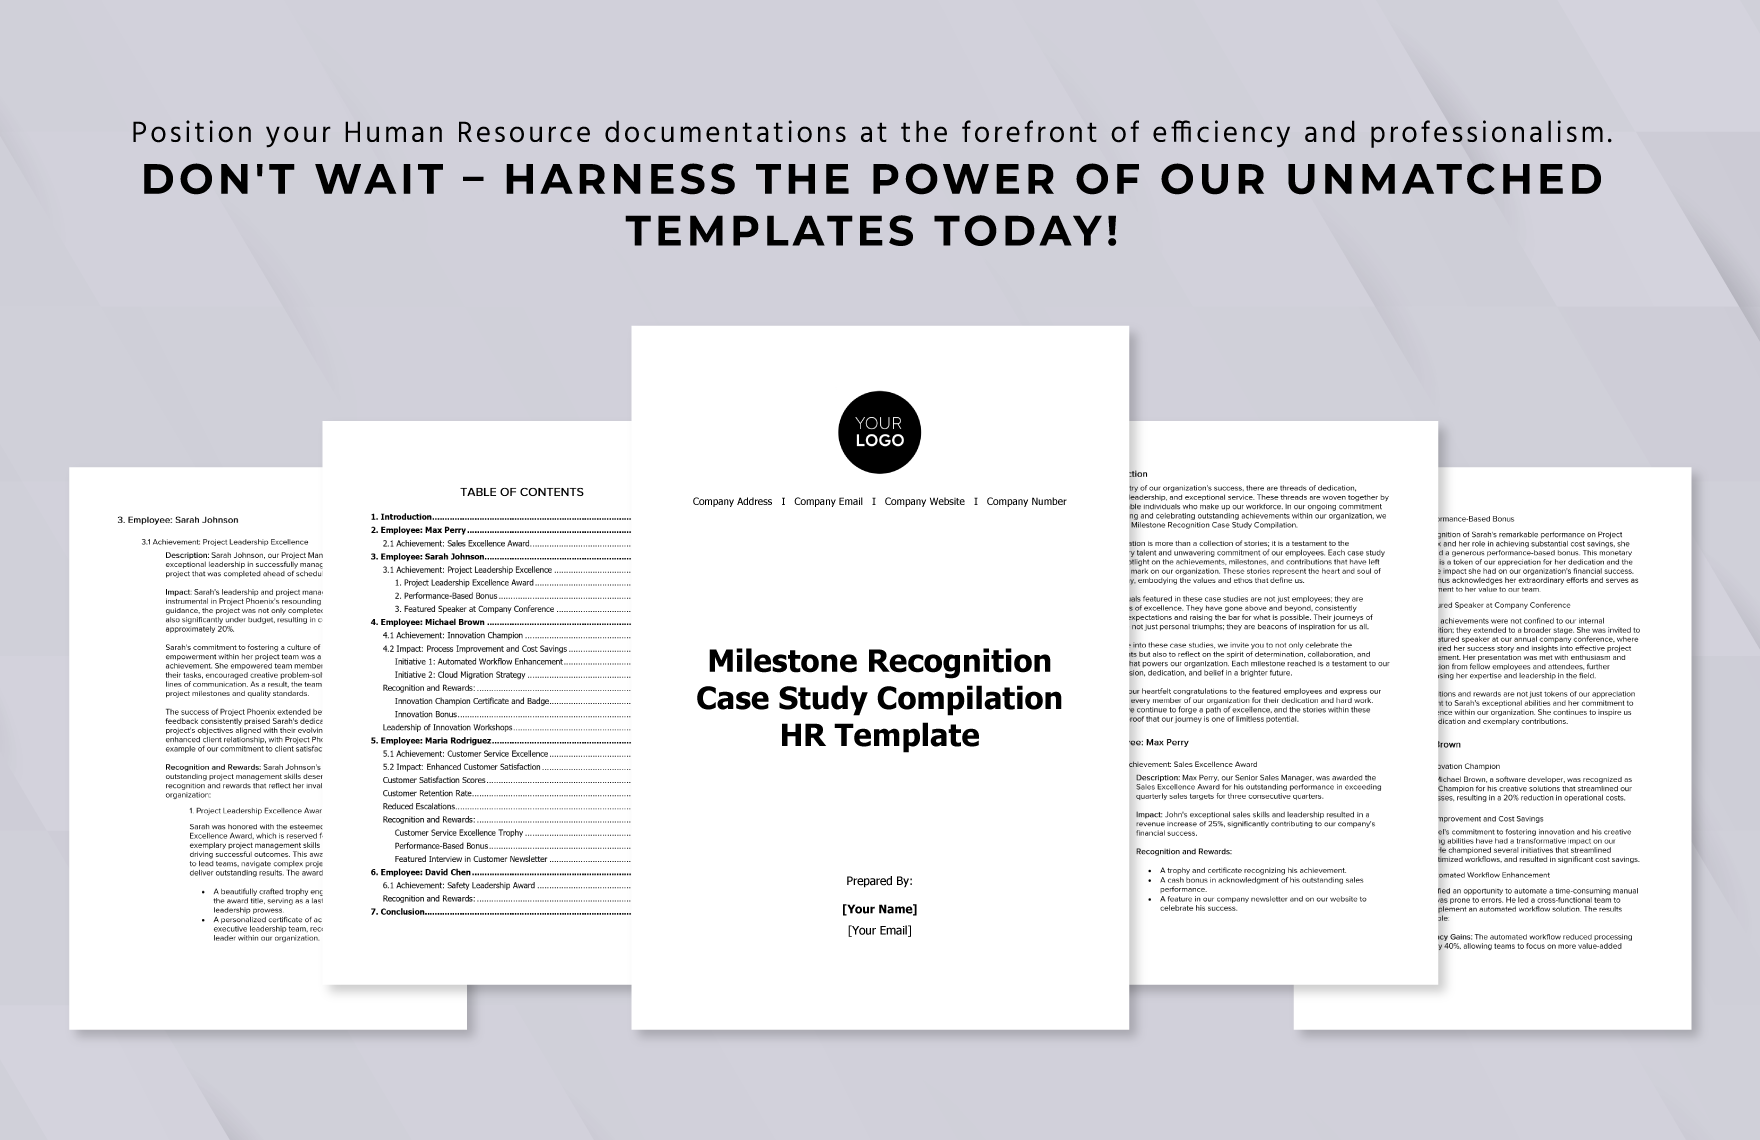 Milestone Recognition Case Study Compilation HR Template